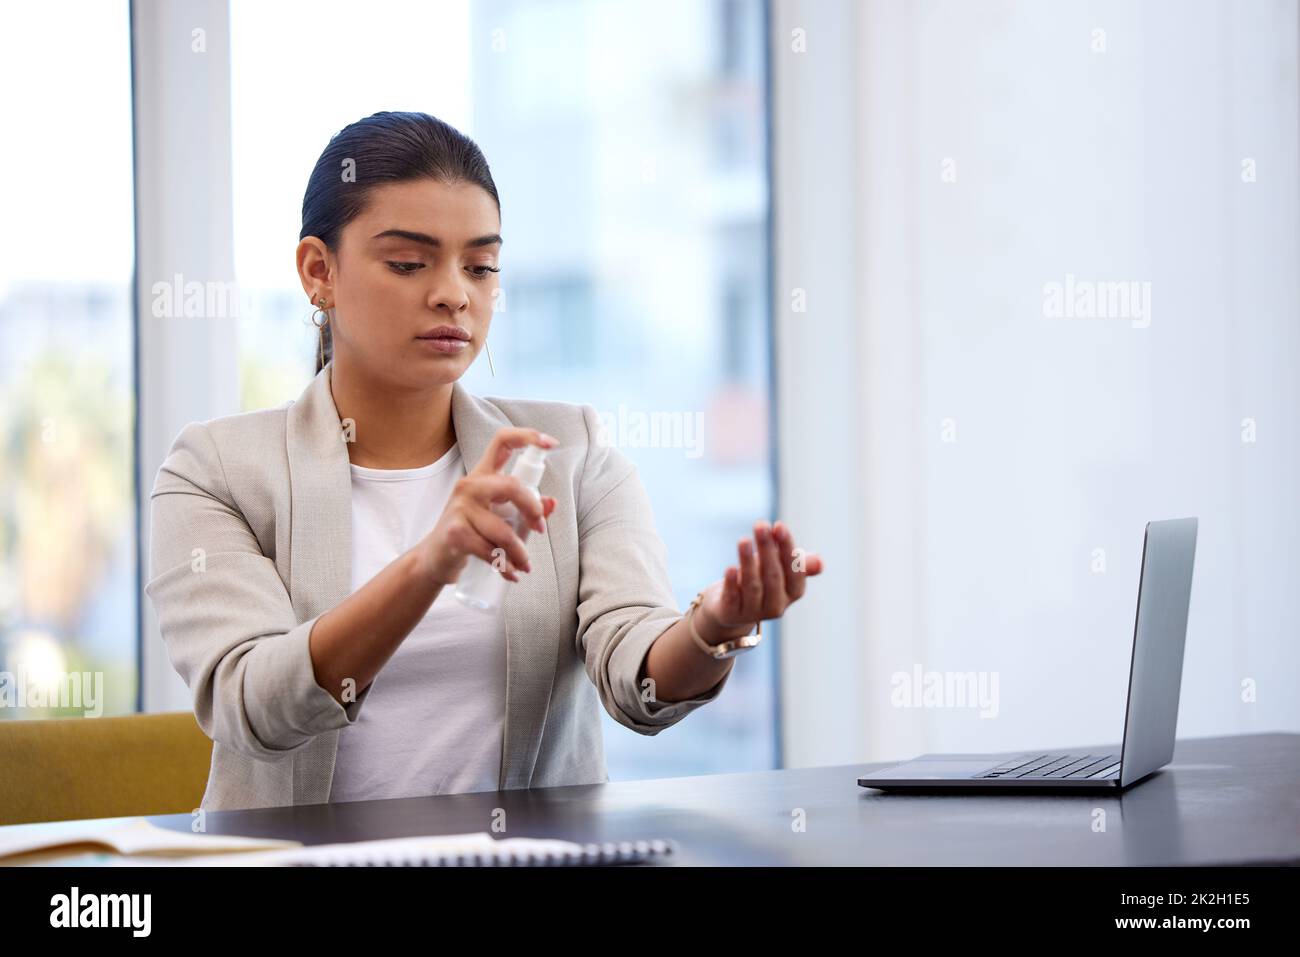 Living lifestyles of the wish-you-would. Shot of a young businesswoman sanitising her work station in a modern office. Stock Photo